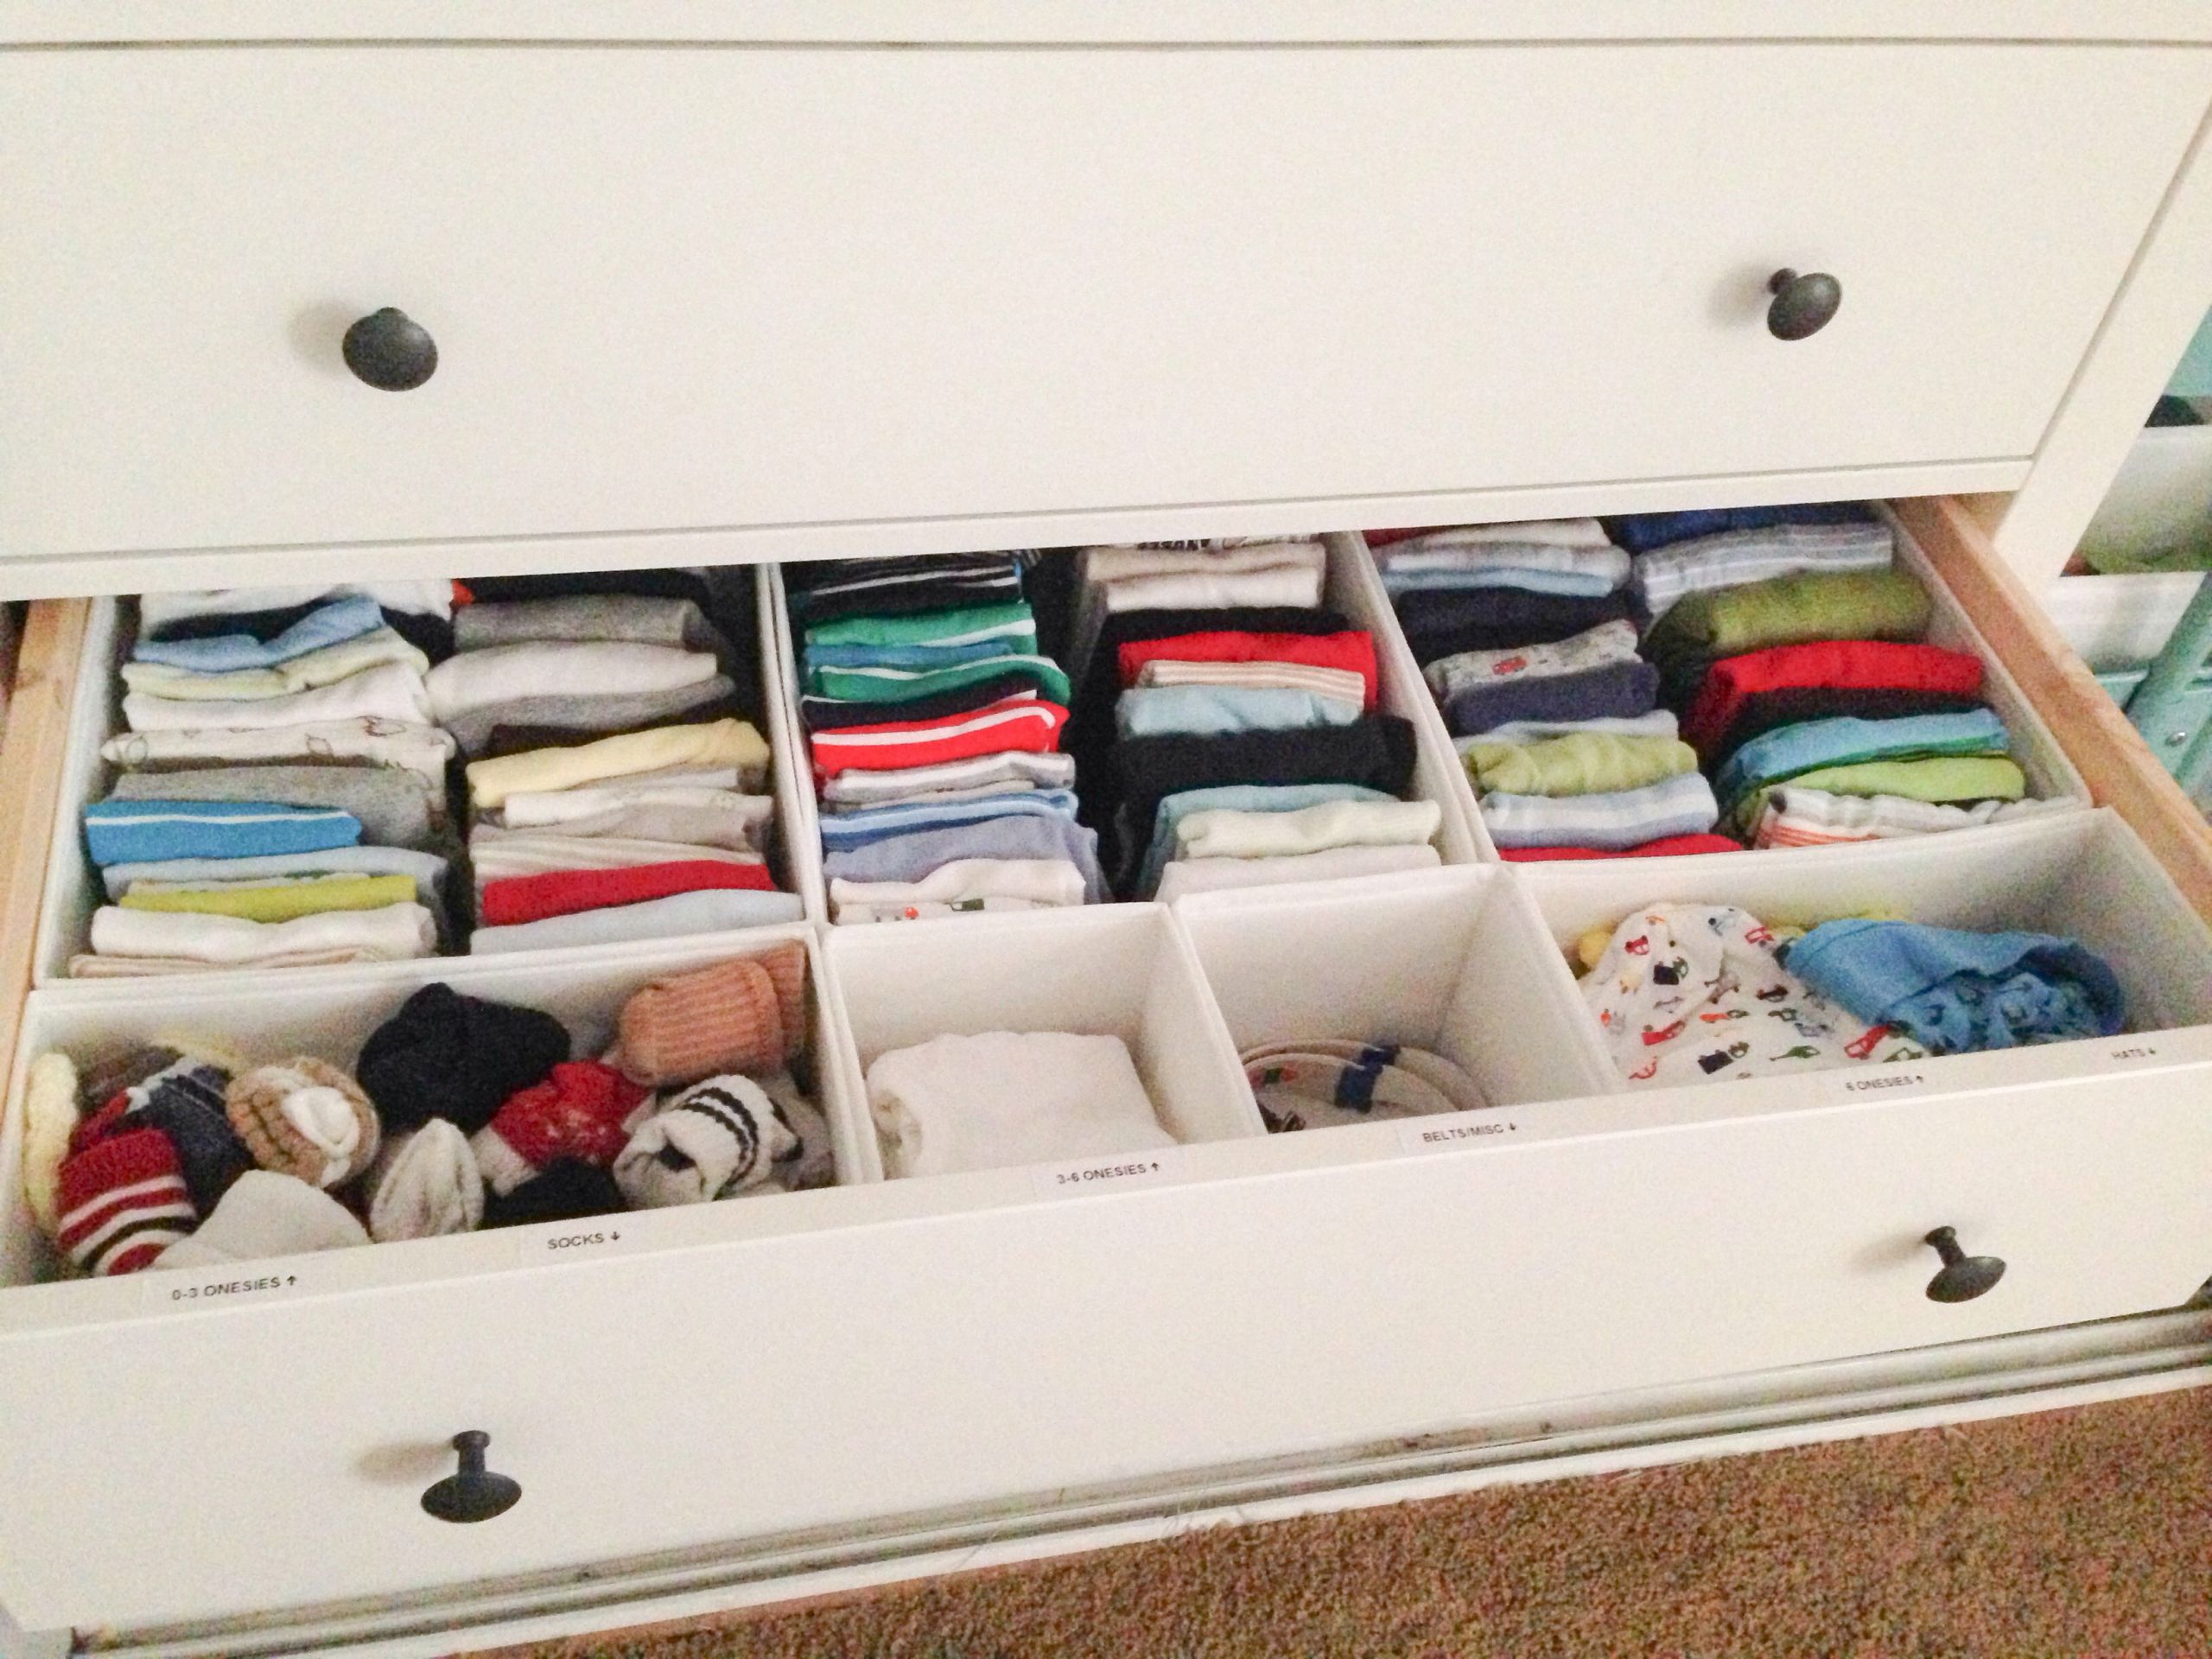 DIY Dresser Drawer Organizer
 How To Organize Drawers For Every Room of the House